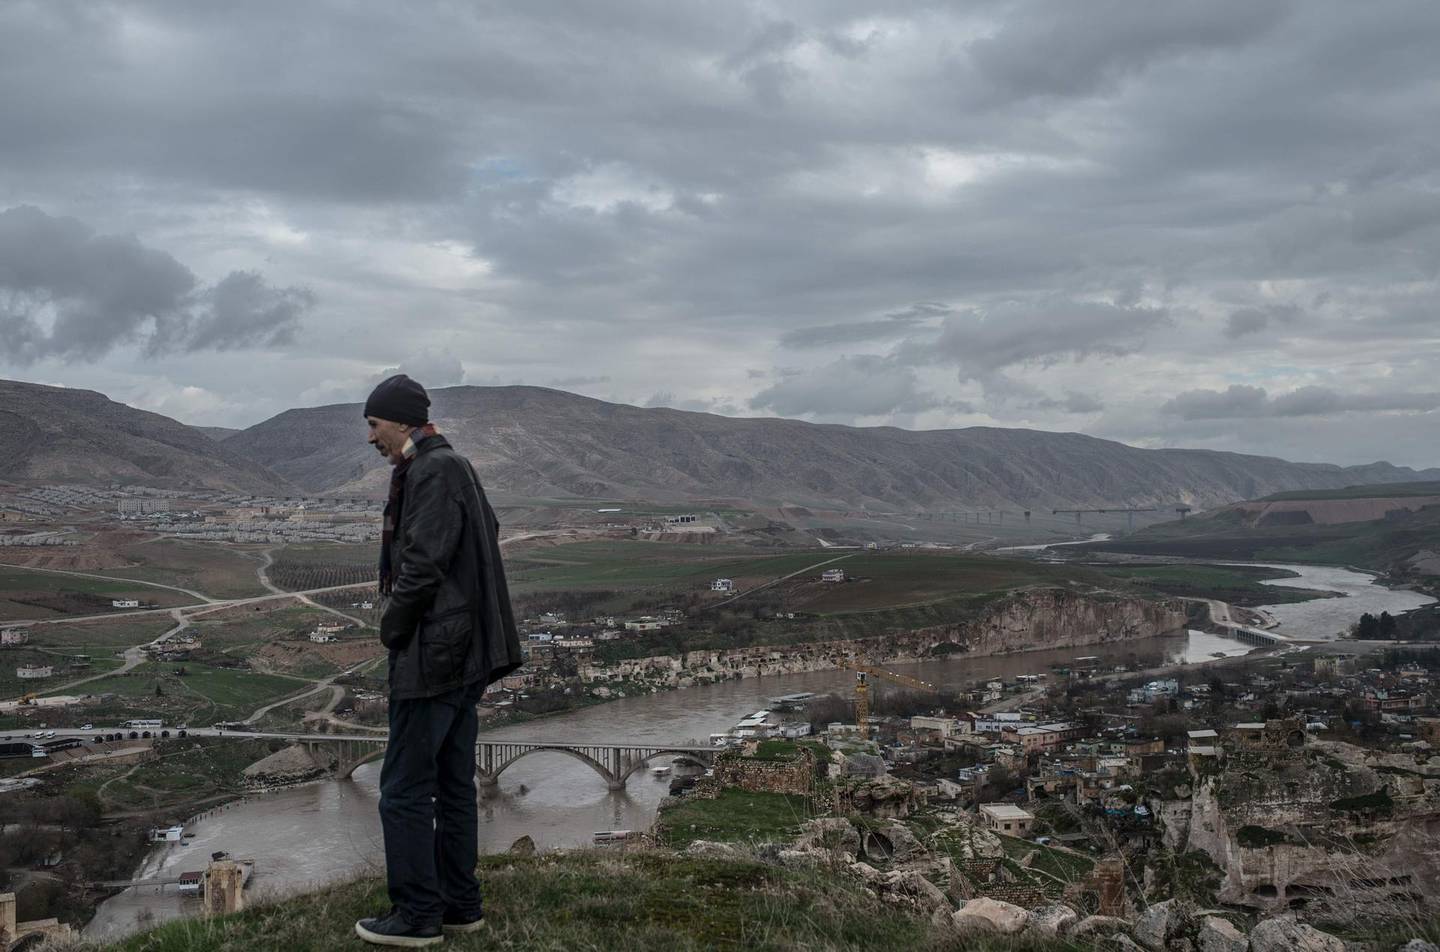 Ridvan Ayhan, a 58-year-old activist who fights against the Ilisi hydroelectric dam project, looks at the "new Hasankeyf" which is seen on the other side of Tigris river, on December 13, 2018, near the historical town of Hasankeyf in Turkey's Kurdish-majority southeast. The small town of Hasankeyf, inhabited for 12,000 years, is doomed to disappear in the months ahead under an artificial lake, as a result of the dam project. The dam will be Turkey's second largest and has been built downstream of the Tigris. / AFP / BULENT KILIC
